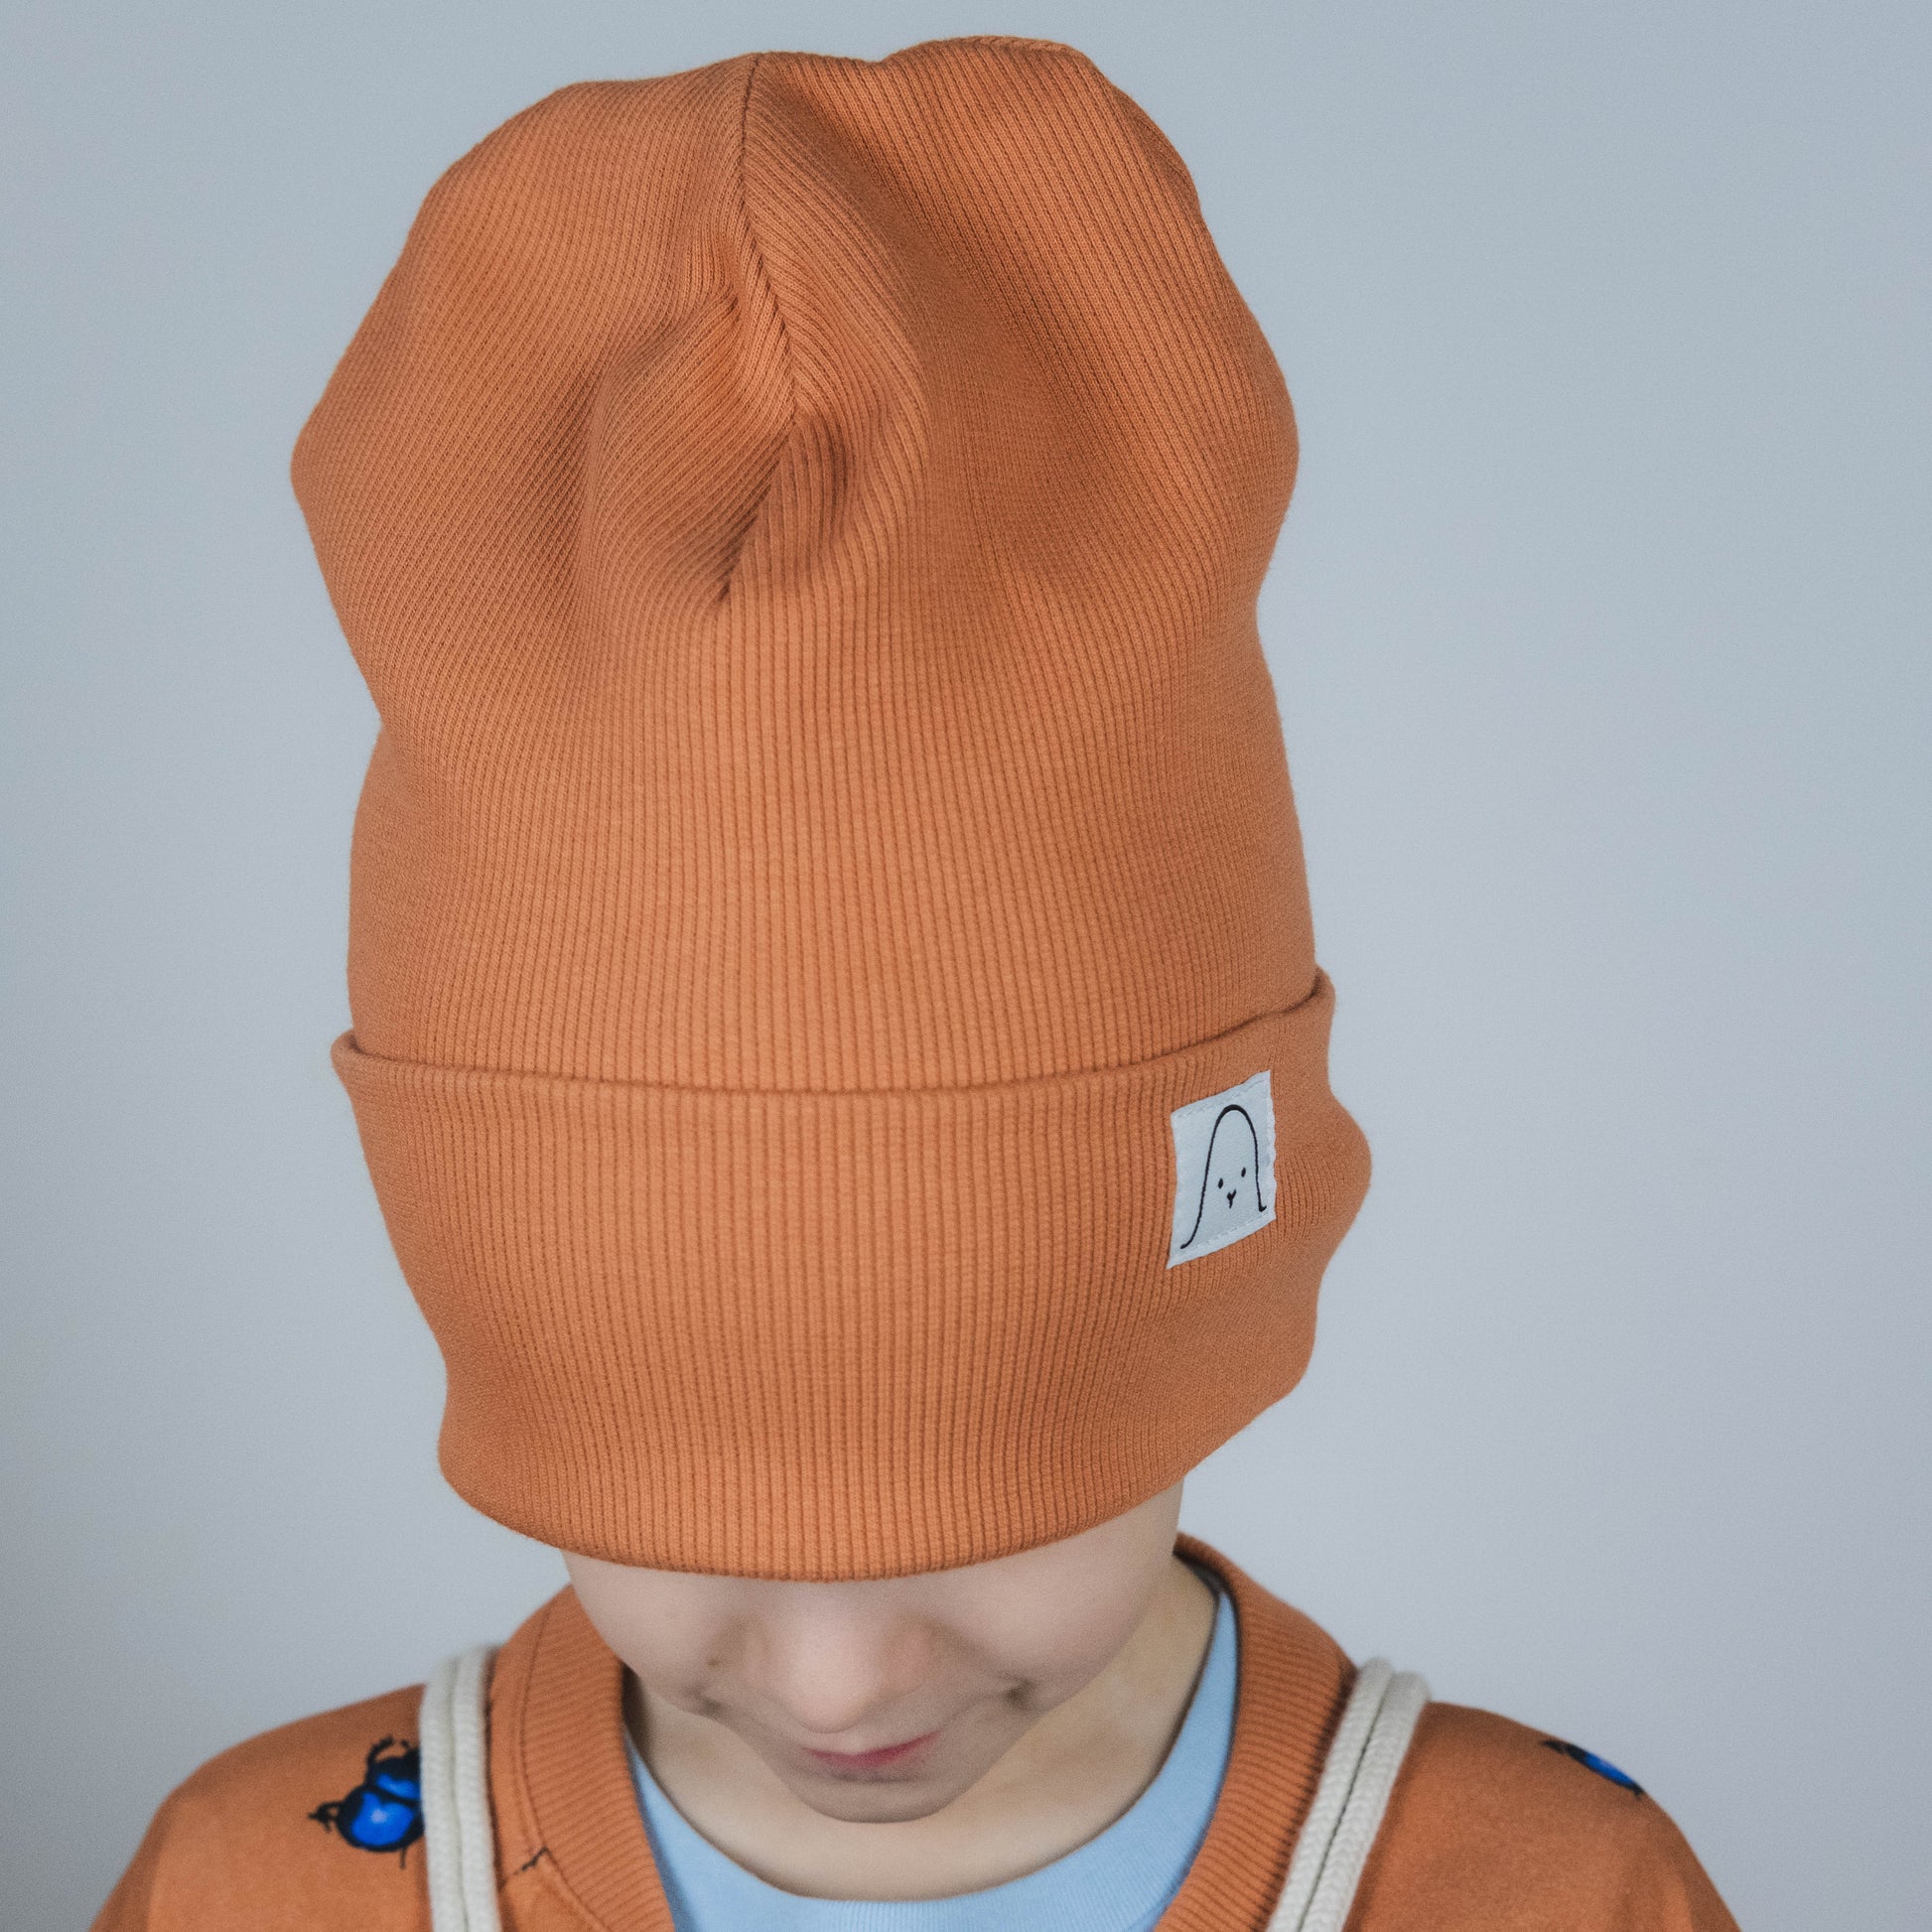 With some left-over organic rib fabric, we saw the possibility to create something new to complete the outfit: a skater-styled beanie.